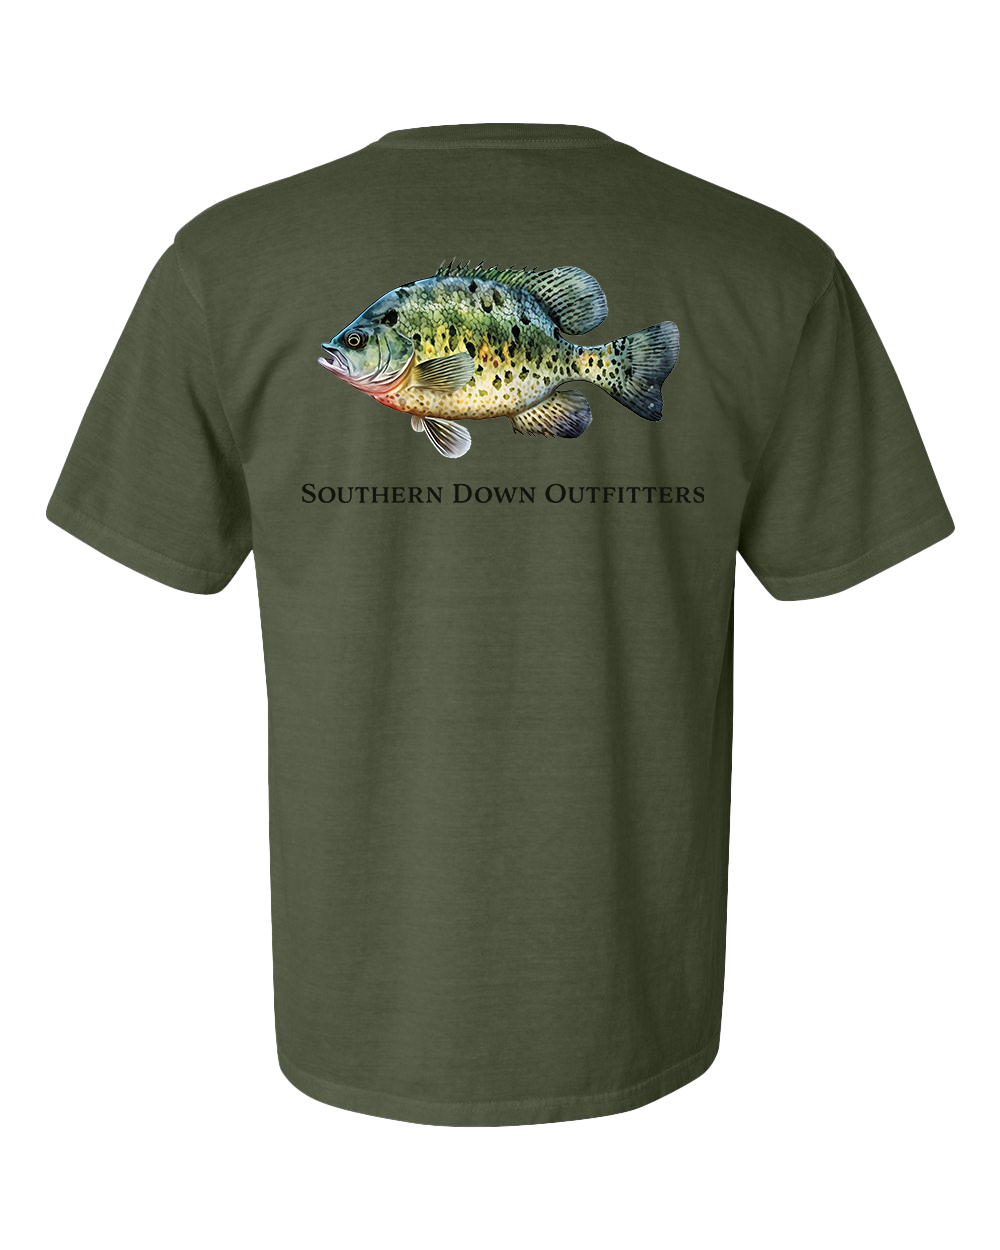 Crappie Fish Tee - Small